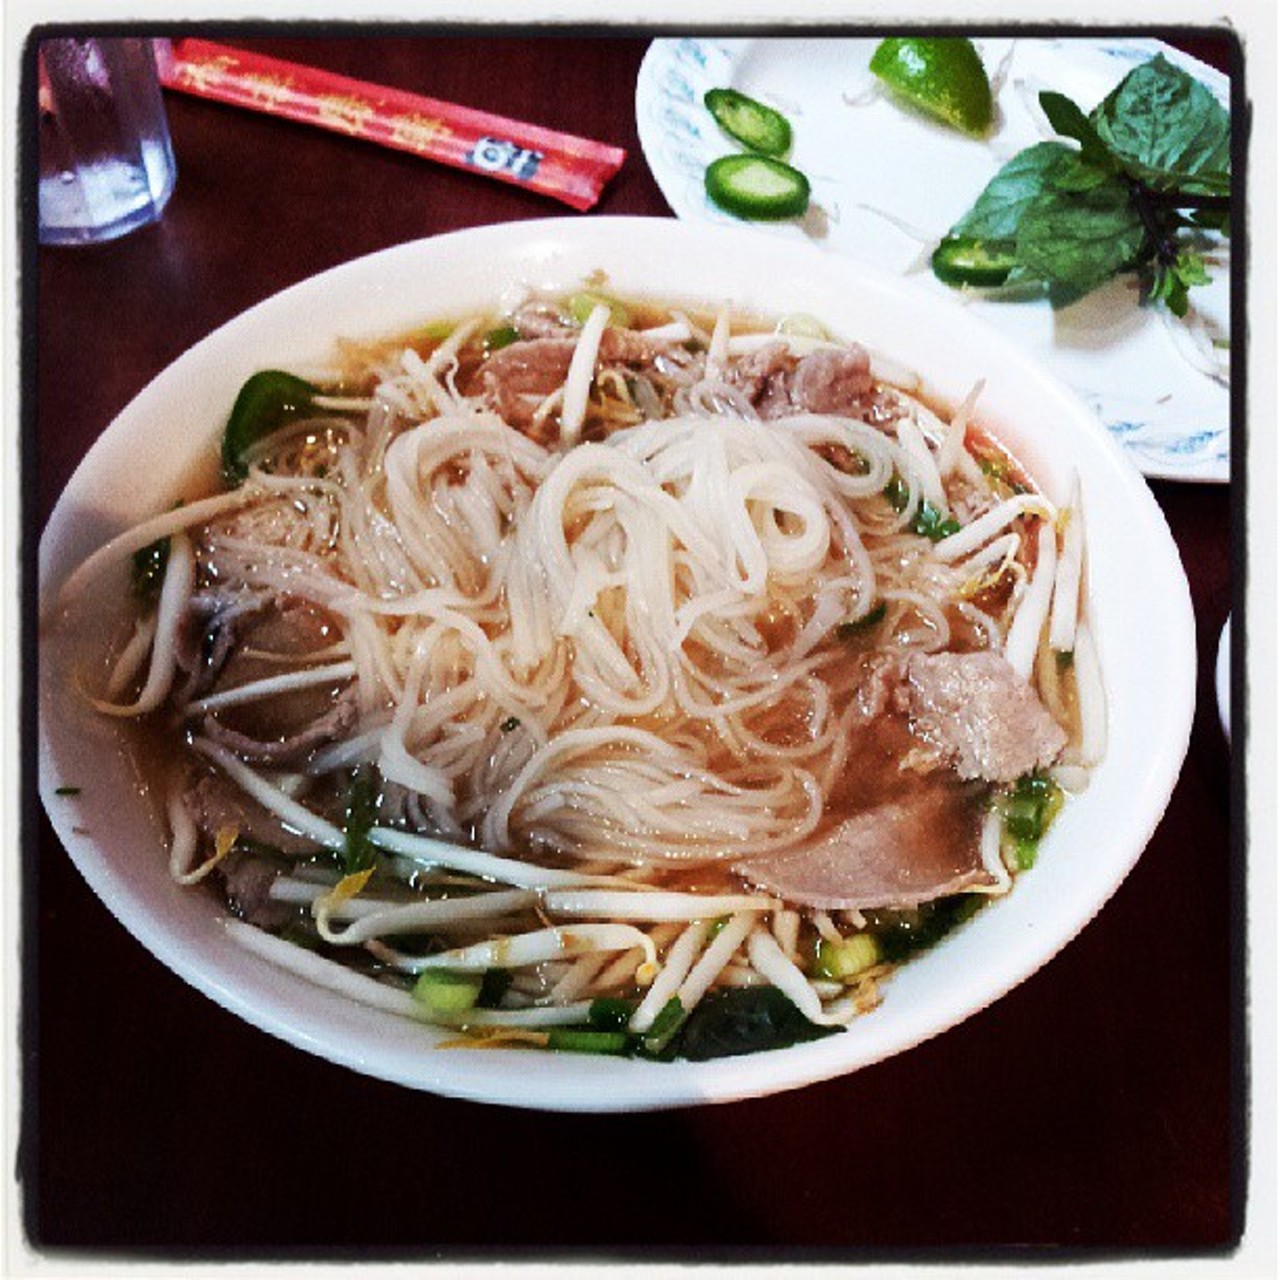 Superior Pho is located at 3030 Superior Ave East, Cleveland. Call (216)781-7462 or visit www.superiorpho.com for more information.